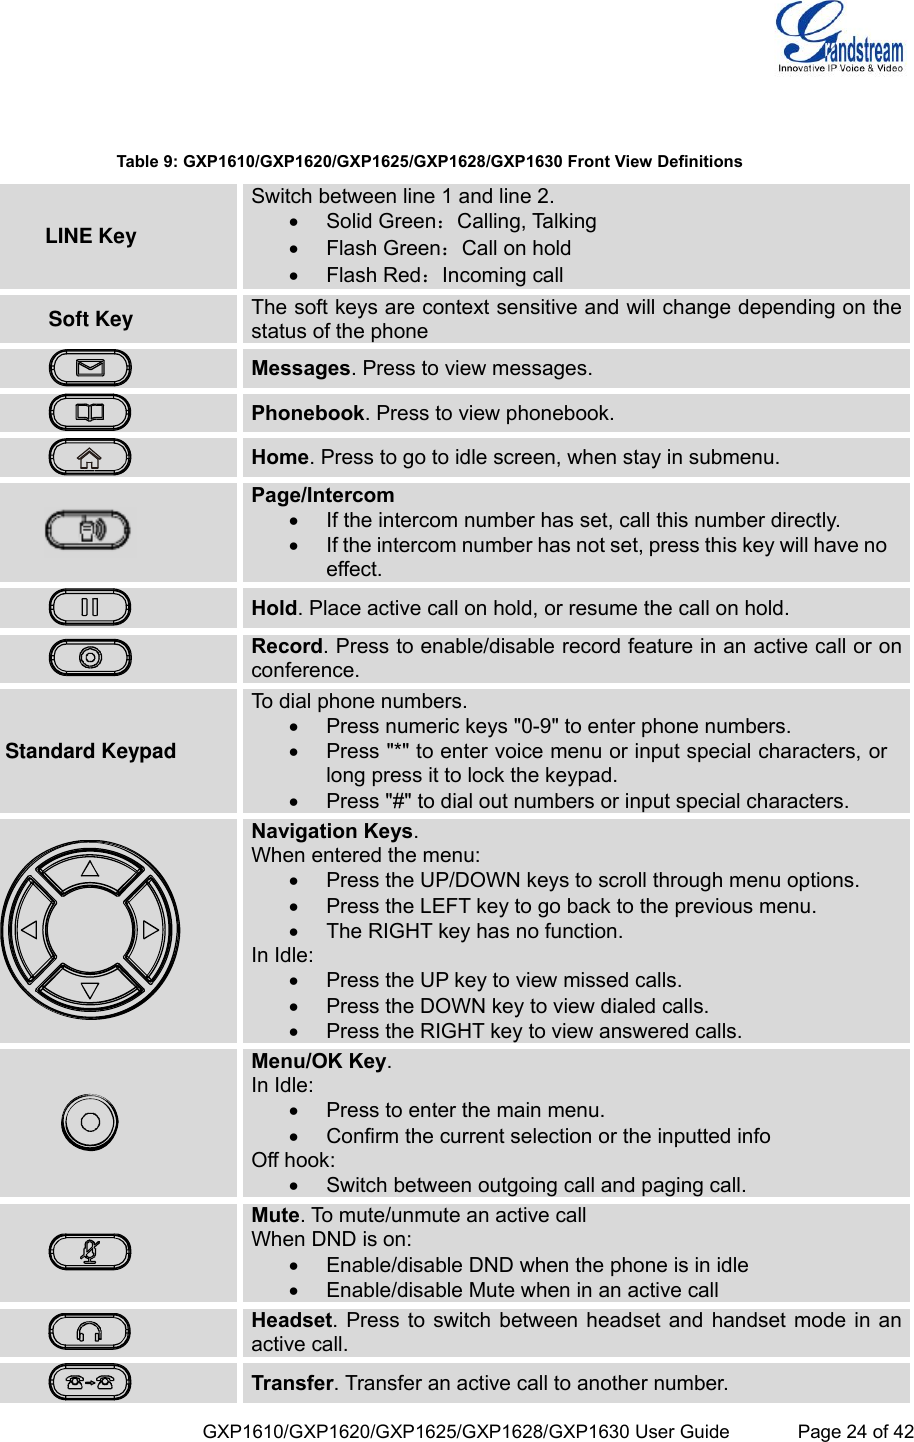  GXP1610/GXP1620/GXP1625/GXP1628/GXP1630 User Guide             Page 24 of 42    Table 9: GXP1610/GXP1620/GXP1625/GXP1628/GXP1630 Front View Definitions  LINE Key Switch between line 1 and line 2.  Solid Green：Calling, Talking  Flash Green：Call on hold  Flash Red：Incoming call Soft Key The soft keys are context sensitive and will change depending on the status of the phone  Messages. Press to view messages.  Phonebook. Press to view phonebook.  Home. Press to go to idle screen, when stay in submenu.  Page/Intercom  If the intercom number has set, call this number directly.   If the intercom number has not set, press this key will have no effect.  Hold. Place active call on hold, or resume the call on hold.  Record. Press to enable/disable record feature in an active call or on conference. Standard Keypad To dial phone numbers.  Press numeric keys &quot;0-9&quot; to enter phone numbers.  Press &quot;*&quot; to enter voice menu or input special characters, or long press it to lock the keypad.  Press &quot;#&quot; to dial out numbers or input special characters.  Navigation Keys. When entered the menu:  Press the UP/DOWN keys to scroll through menu options.  Press the LEFT key to go back to the previous menu.  The RIGHT key has no function. In Idle:  Press the UP key to view missed calls.  Press the DOWN key to view dialed calls.  Press the RIGHT key to view answered calls.  Menu/OK Key. In Idle:  Press to enter the main menu.  Confirm the current selection or the inputted info Off hook:  Switch between outgoing call and paging call.  Mute. To mute/unmute an active call When DND is on:  Enable/disable DND when the phone is in idle  Enable/disable Mute when in an active call  Headset. Press to switch between headset and handset mode in an active call.  Transfer. Transfer an active call to another number. 